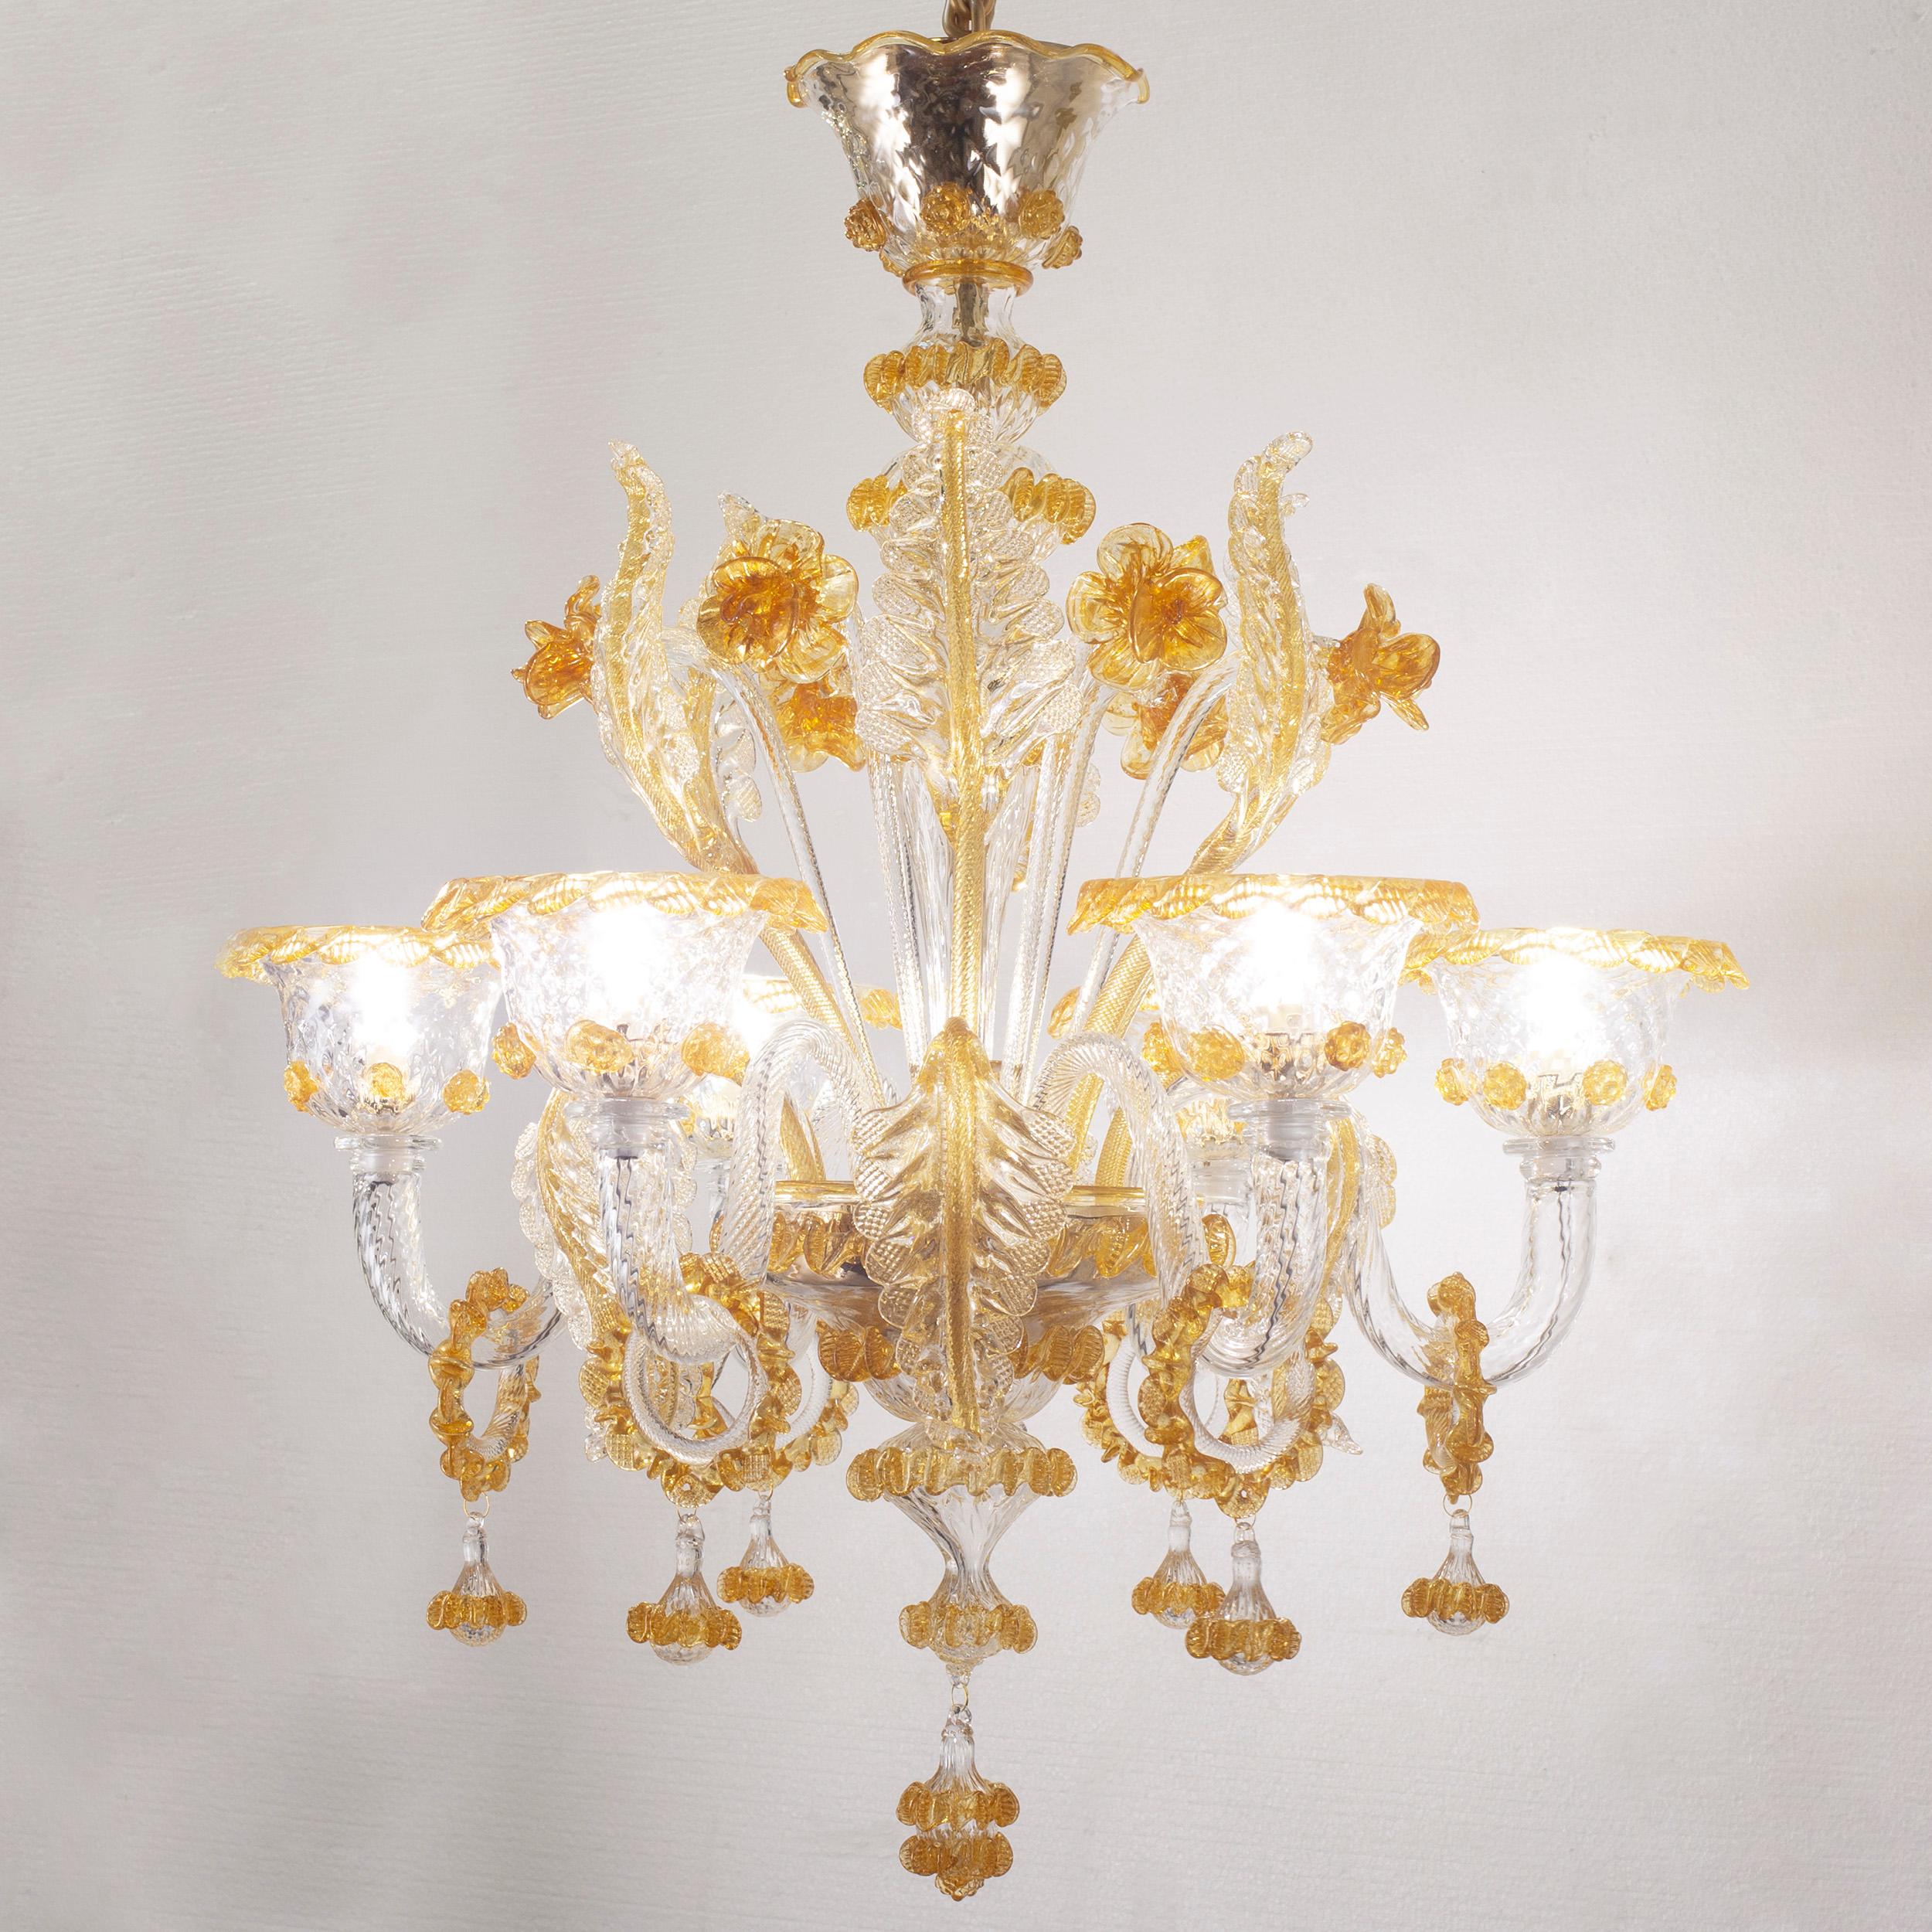 Galliano chandelier, 6-light, crystal, and amber Murano glass by Multiforme.
This artistic glass chandelier has 6-light, is completely handmade. 
Galliano is our tribute to the authentic Murano glass tradition. It requires extremely complex and slow